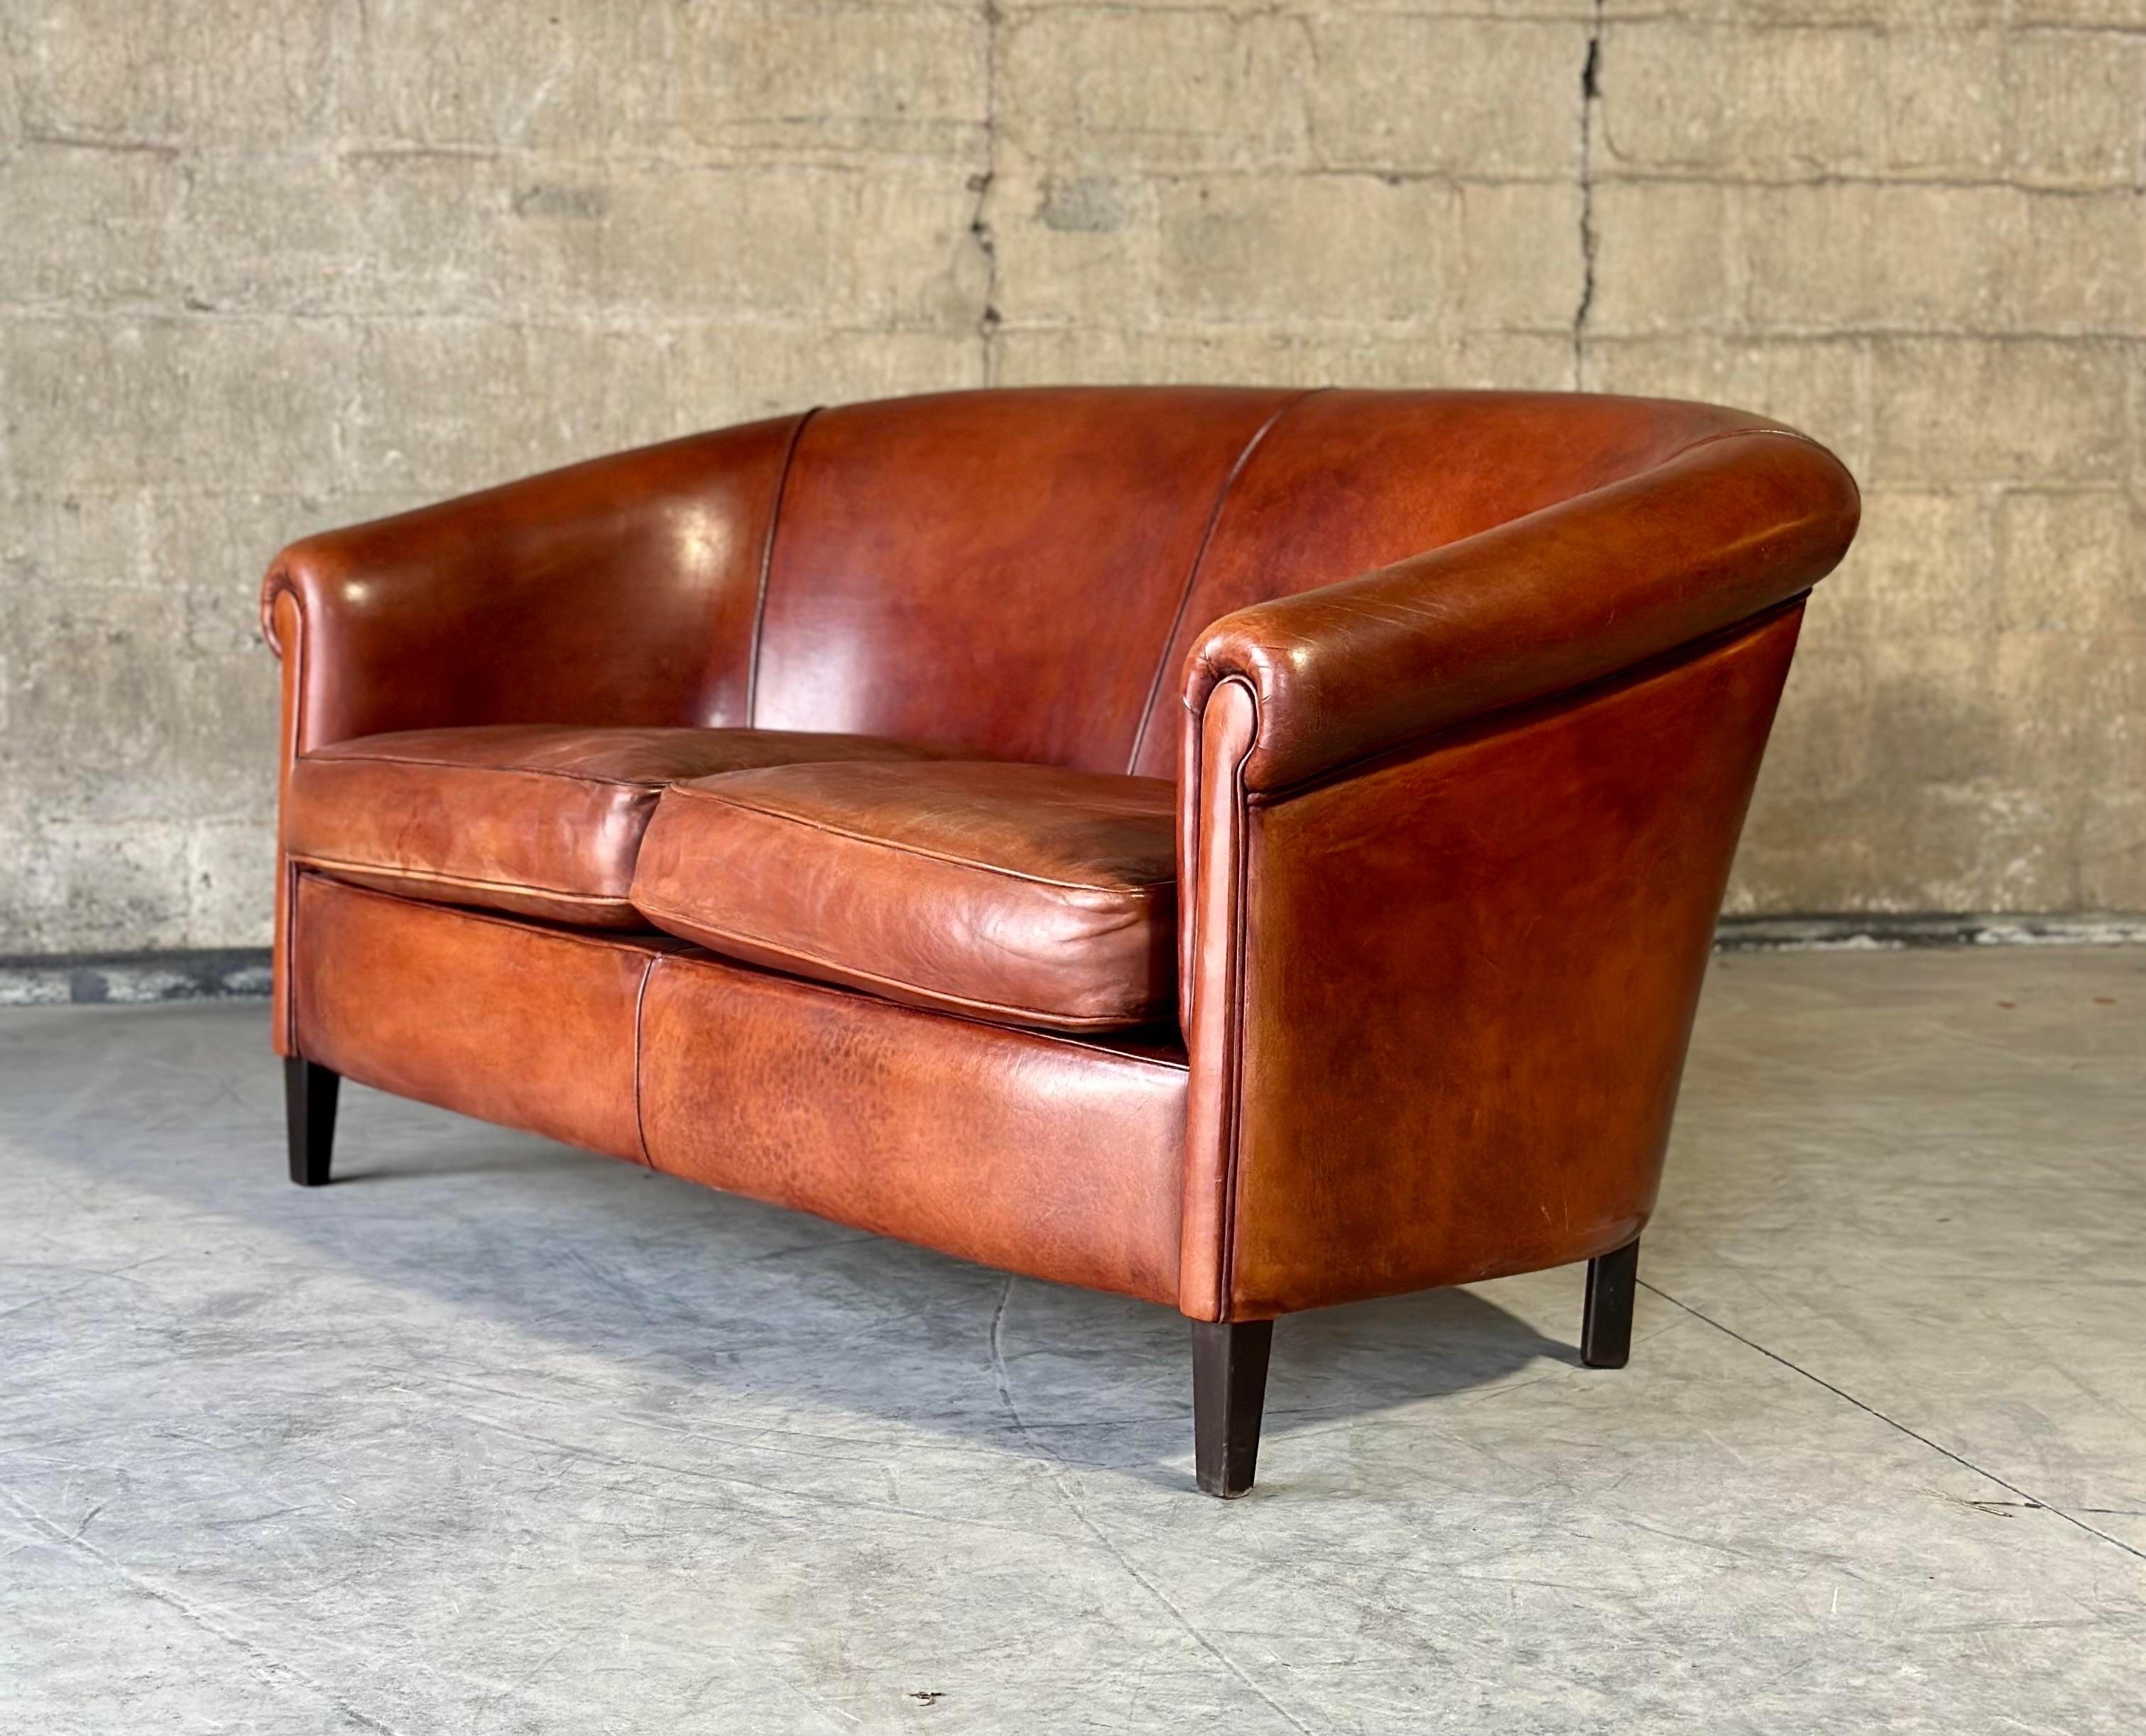 Two seater sheep skin settee/loveseat. Gorgeous leather, soft and durable with the perfect amount of variation and wear. Ready for another 100 years!